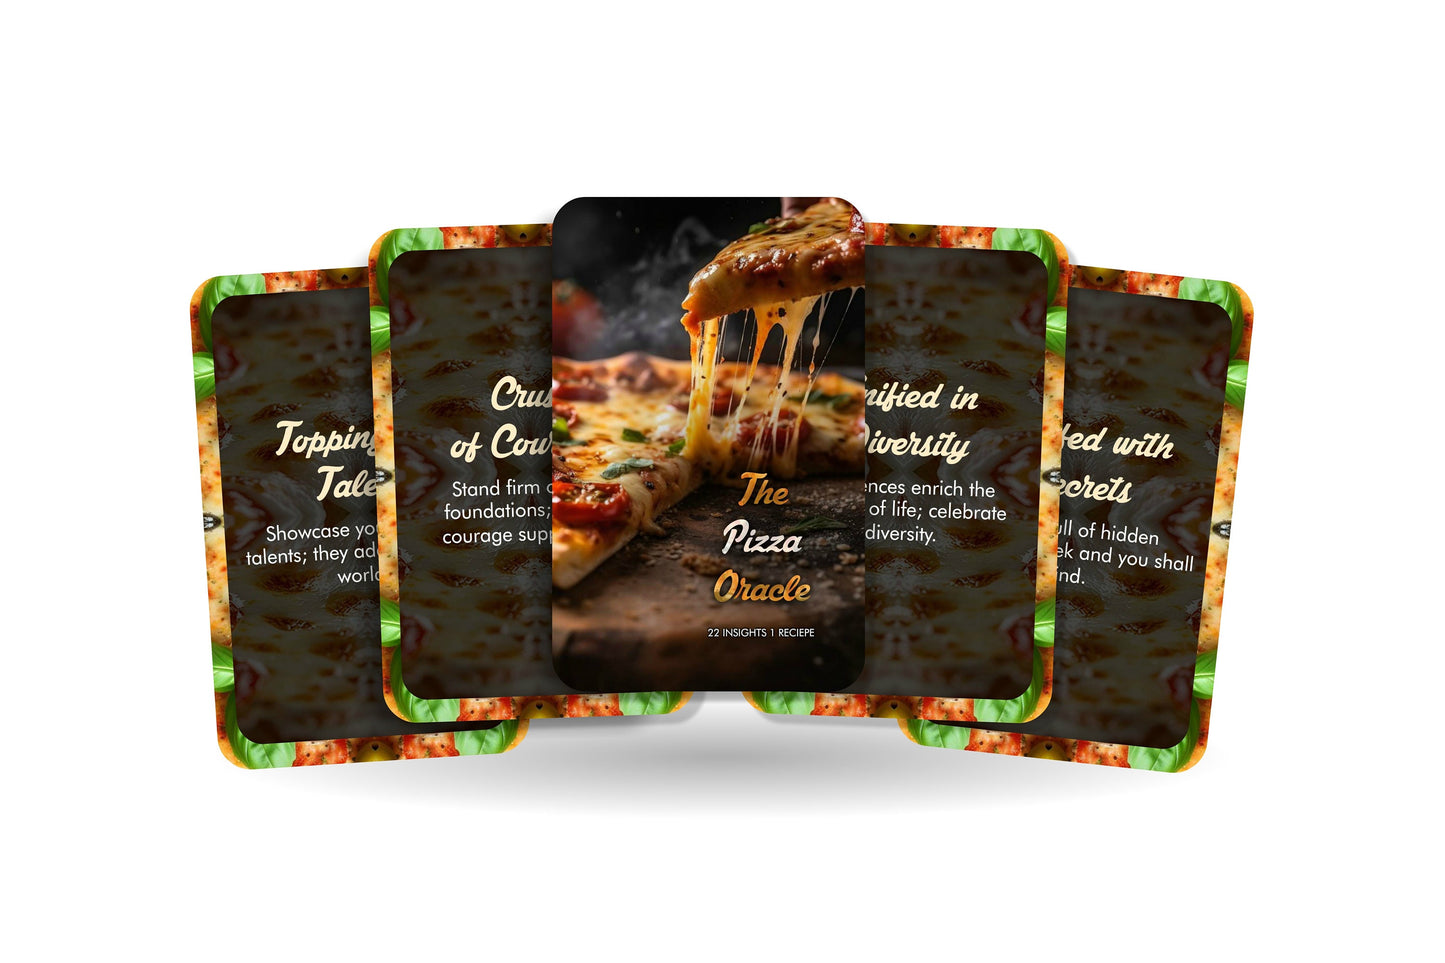 The Pizza Oracle - Twenty Two insights and One recipe